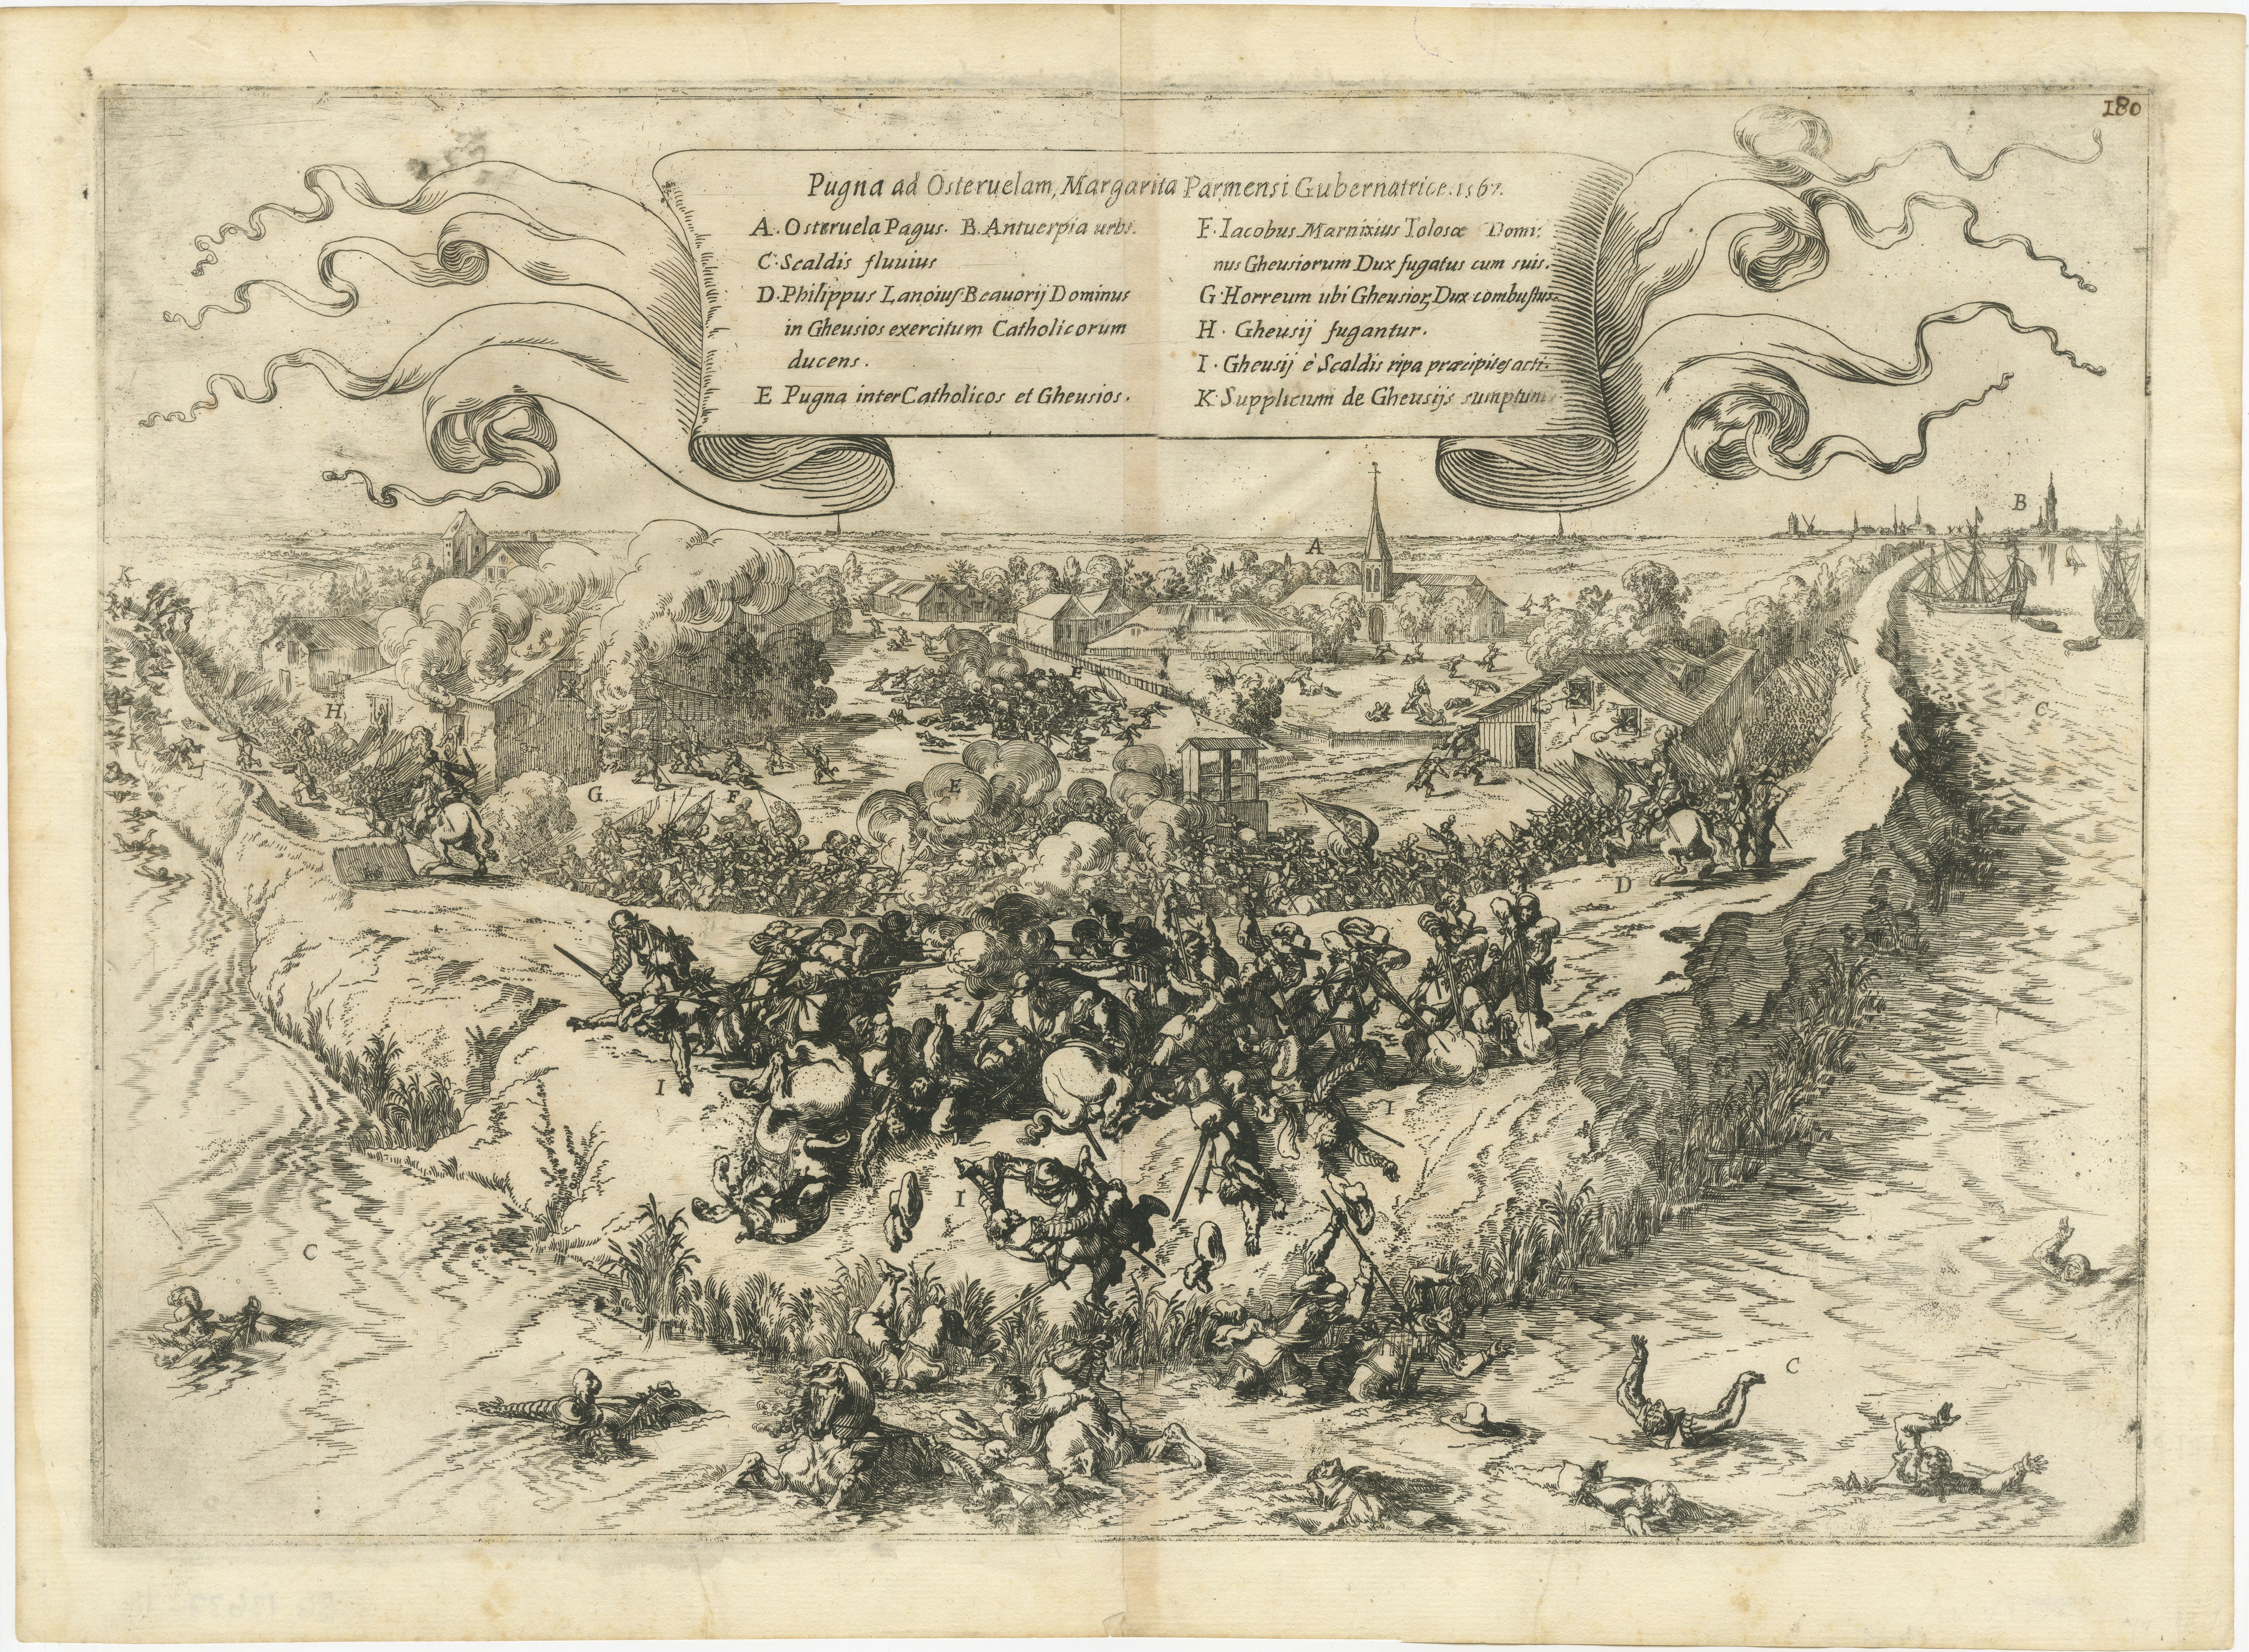 An original antique engraving of the Battle of Oosterweel, which took place in 1567 during the Dutch Revolt. It is an early conflict leading up to the full-scale Eighty Years' War. The battle was a significant defeat for the rebels against Spanish